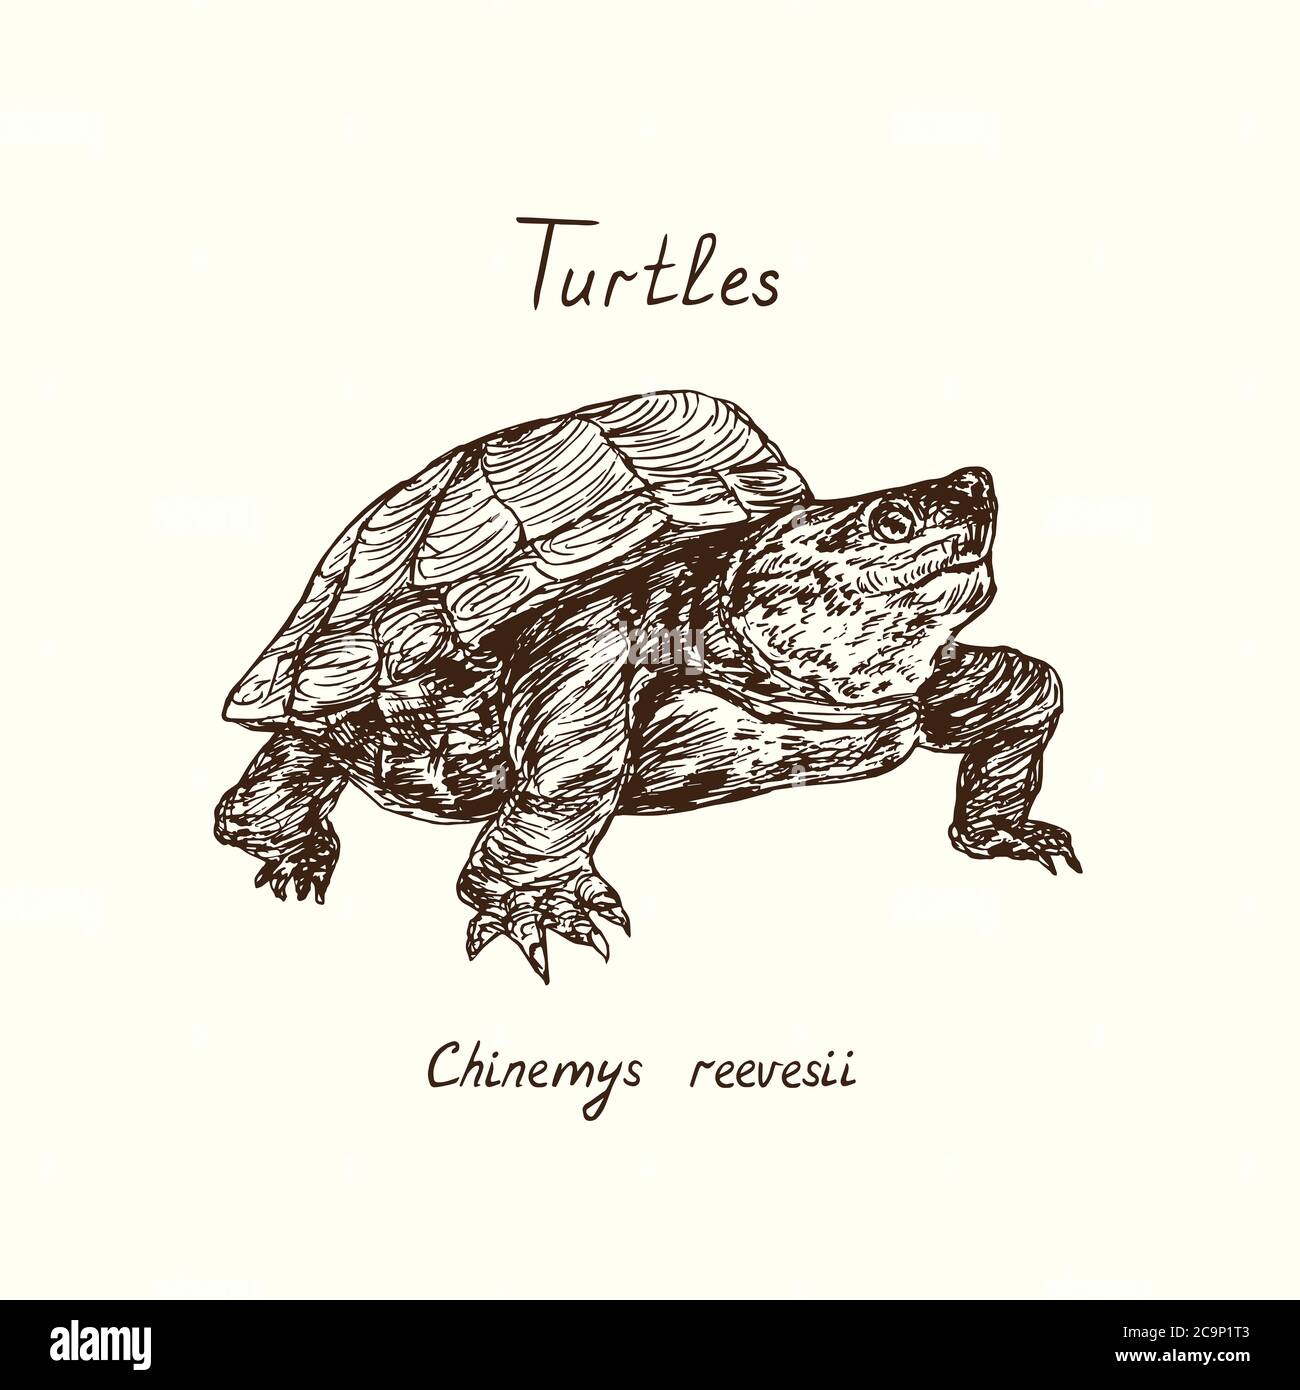 Tutles collection,  Chinemys reevesii (Mauremys reevesii, Chinese pond turtle, Chinese three-keeled pond turtle, Reeves' turtle), hand drawn doodle Stock Photo